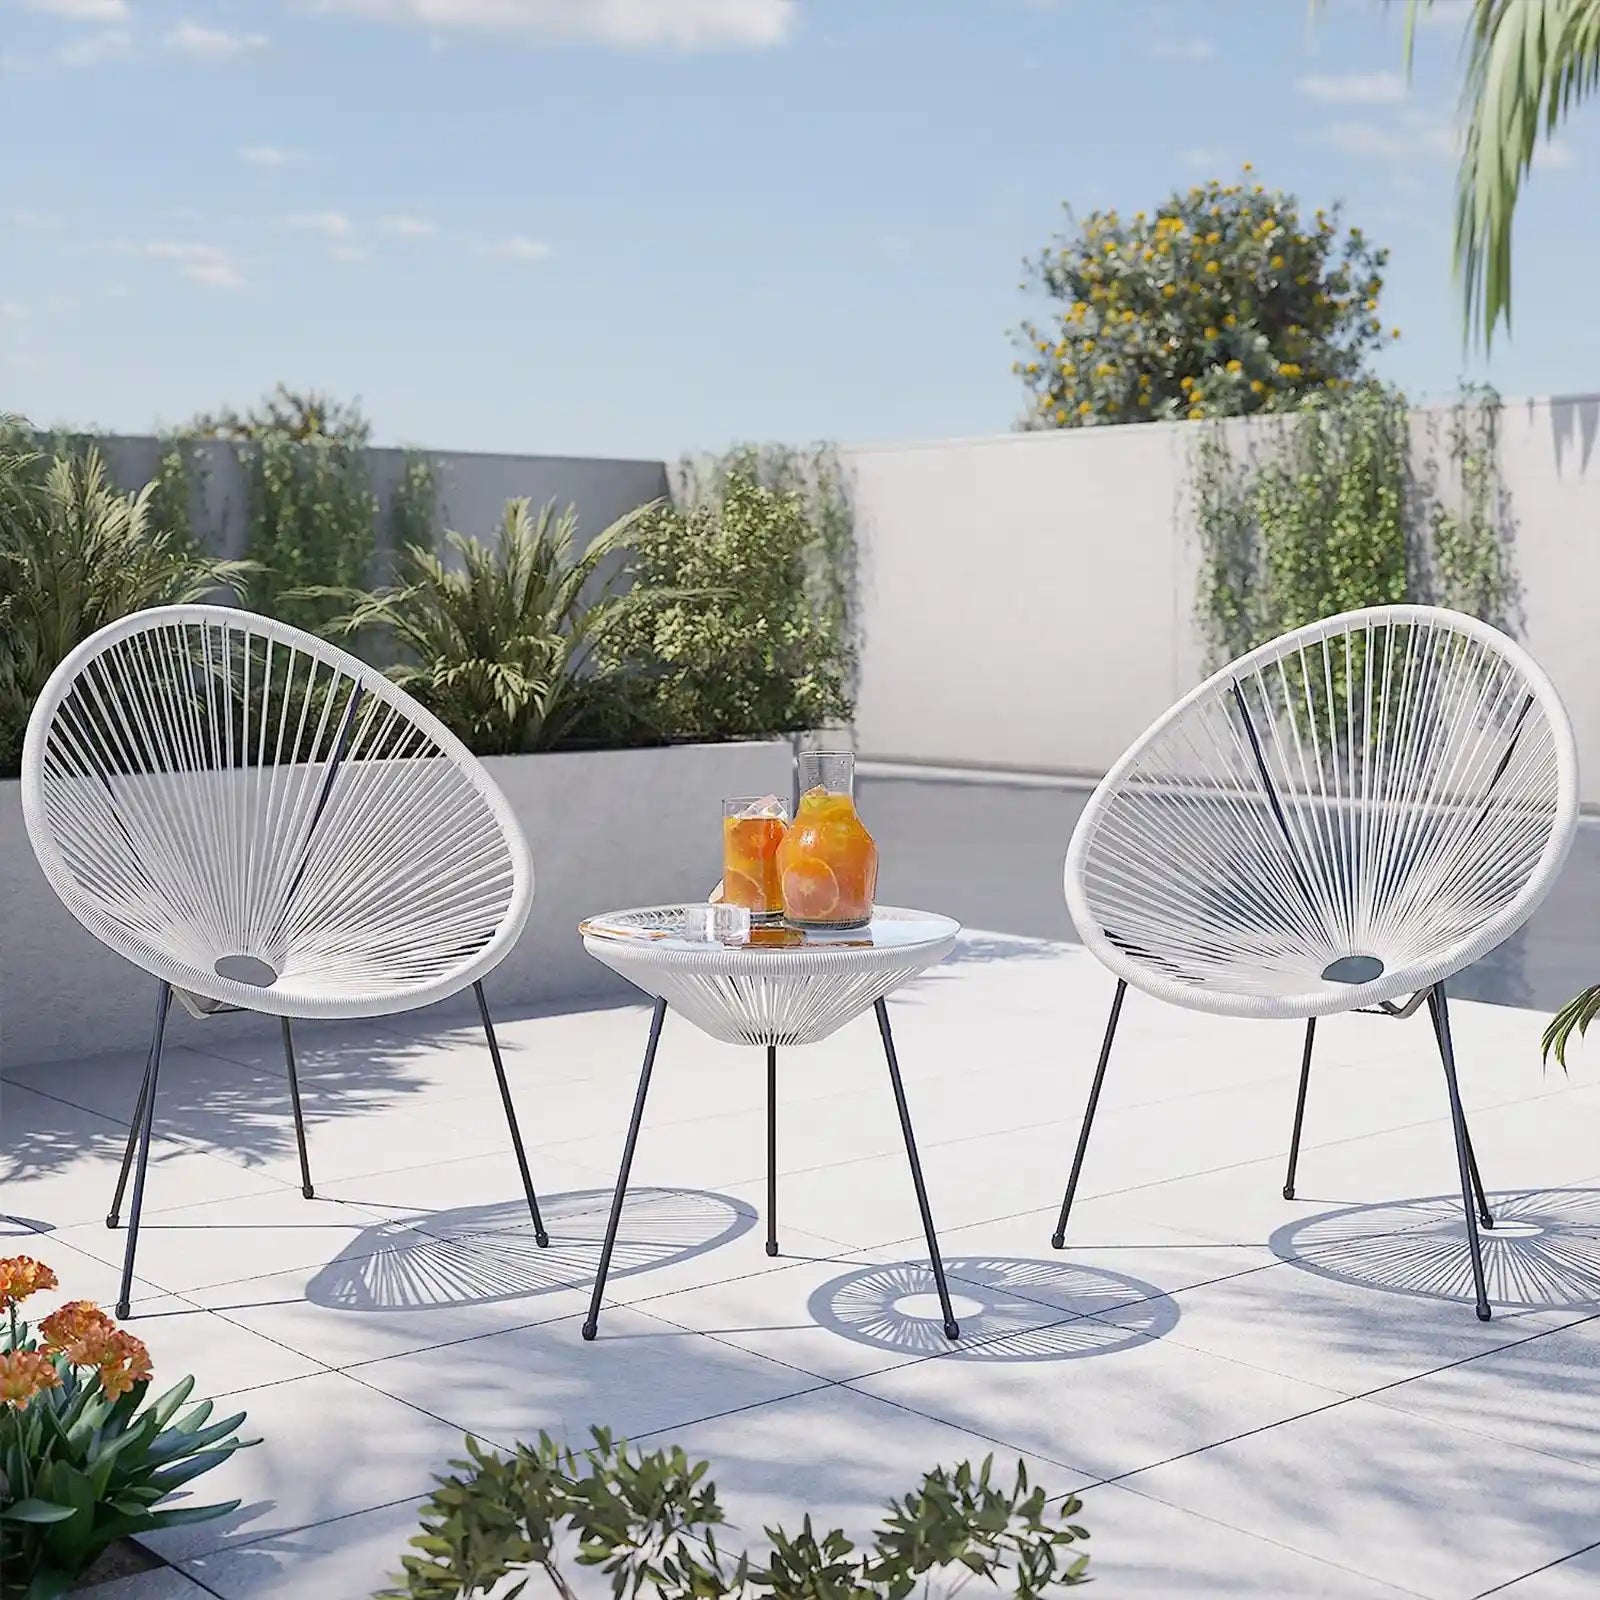 3 Piece Modern Rattan Patio Bistro Set with Round Chairs and Glass Top Accent Table, Wicker Outdoor Furniture for Backyard or Porch